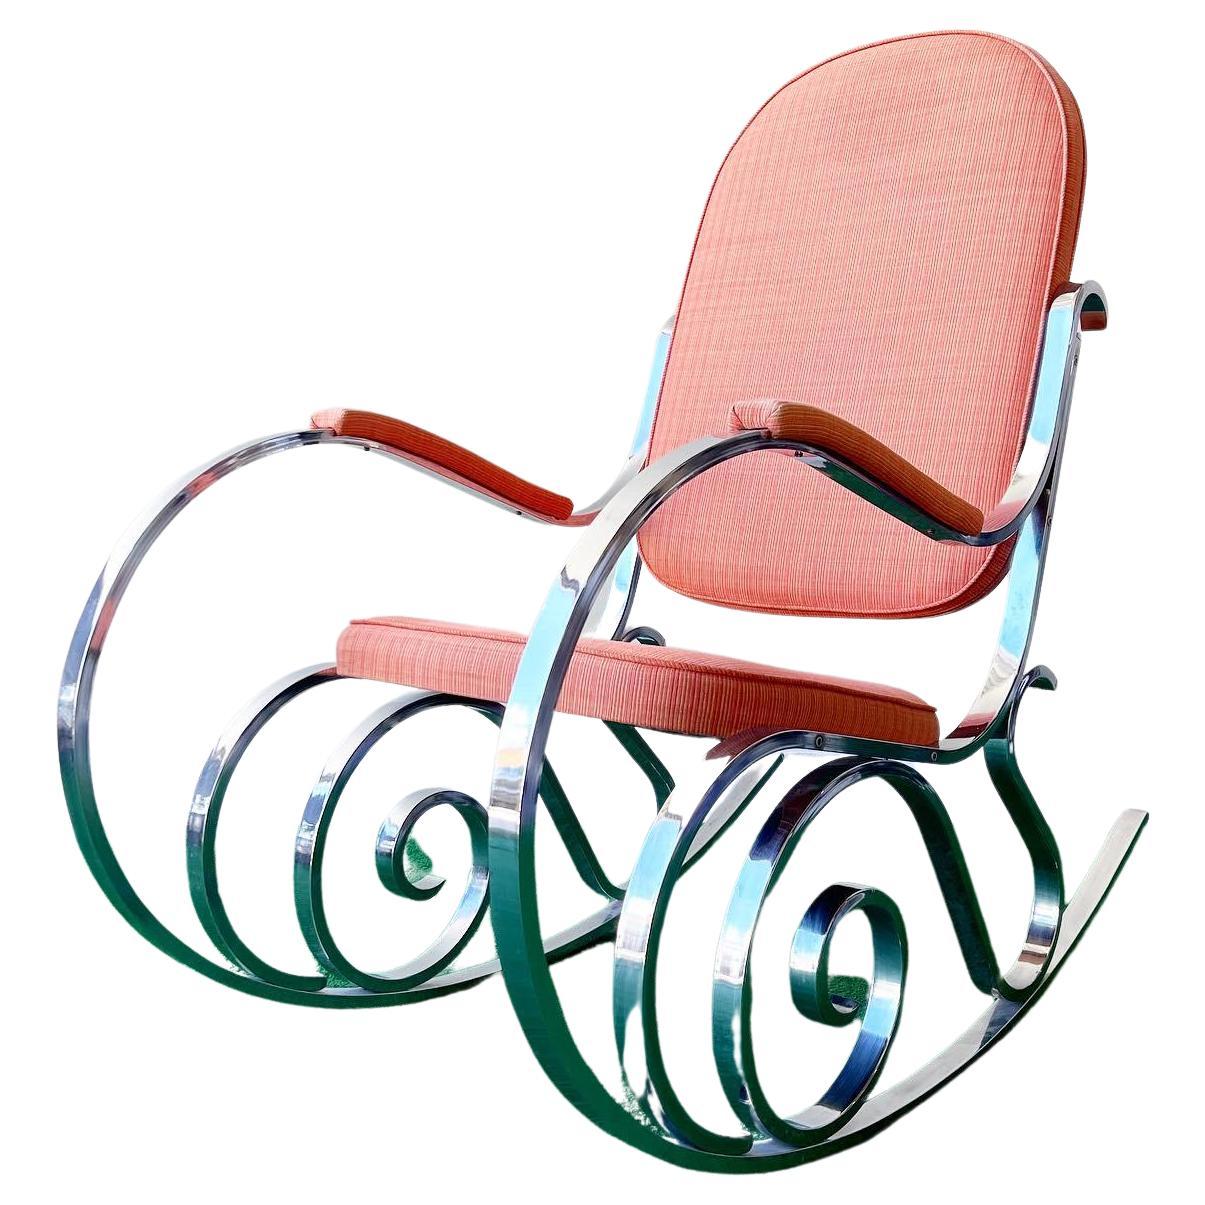 1970s Metal Rocking Chairs - 36 For Sale on 1stDibs